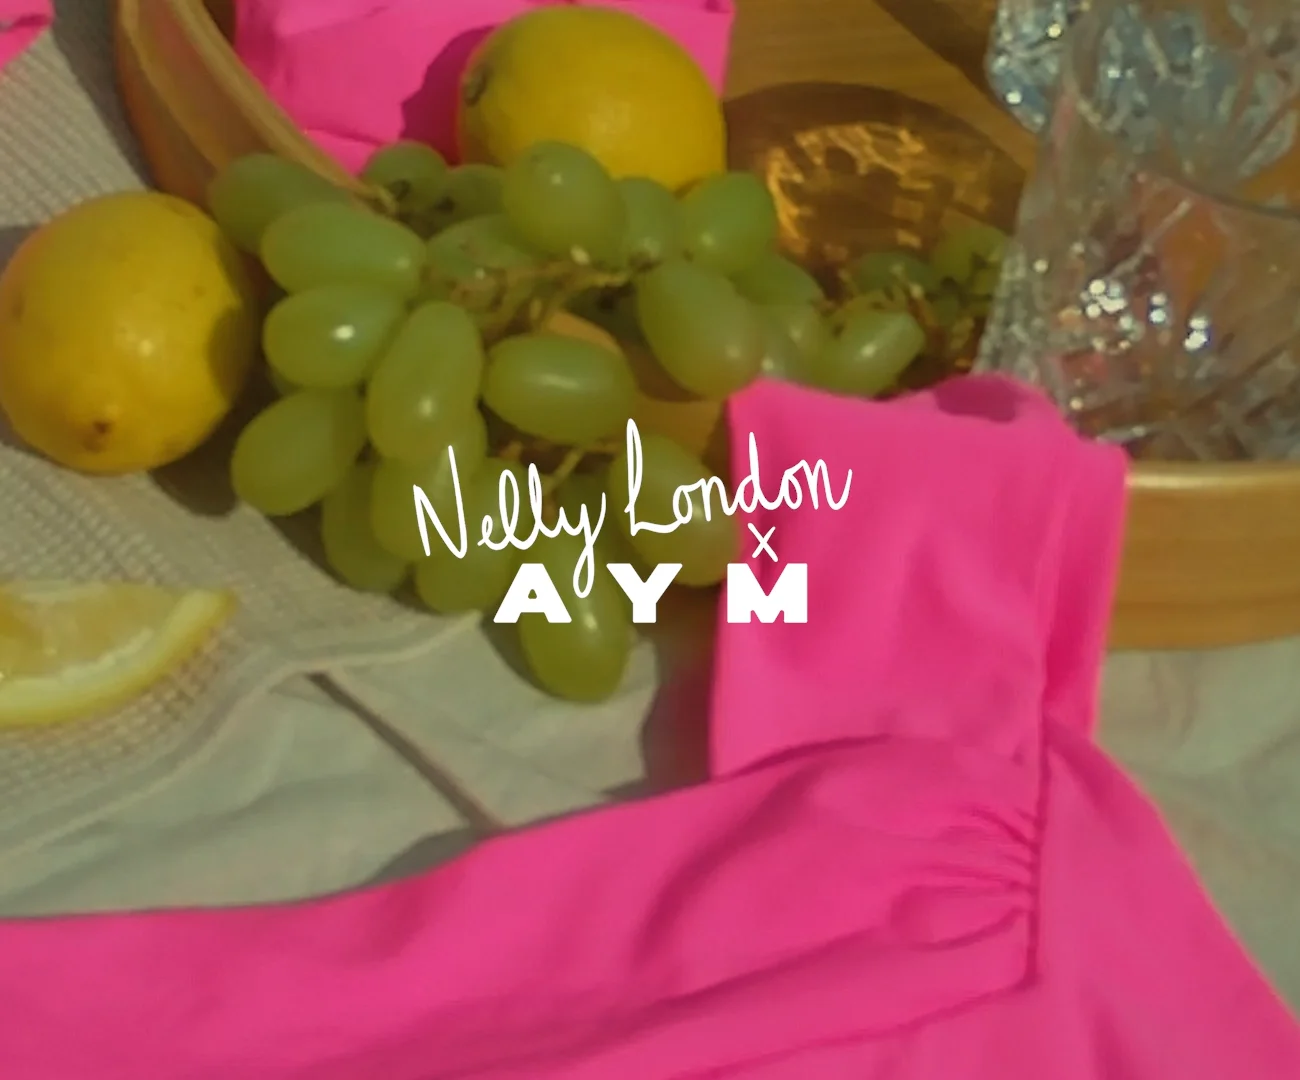 Q&A with Nelly London – AYM